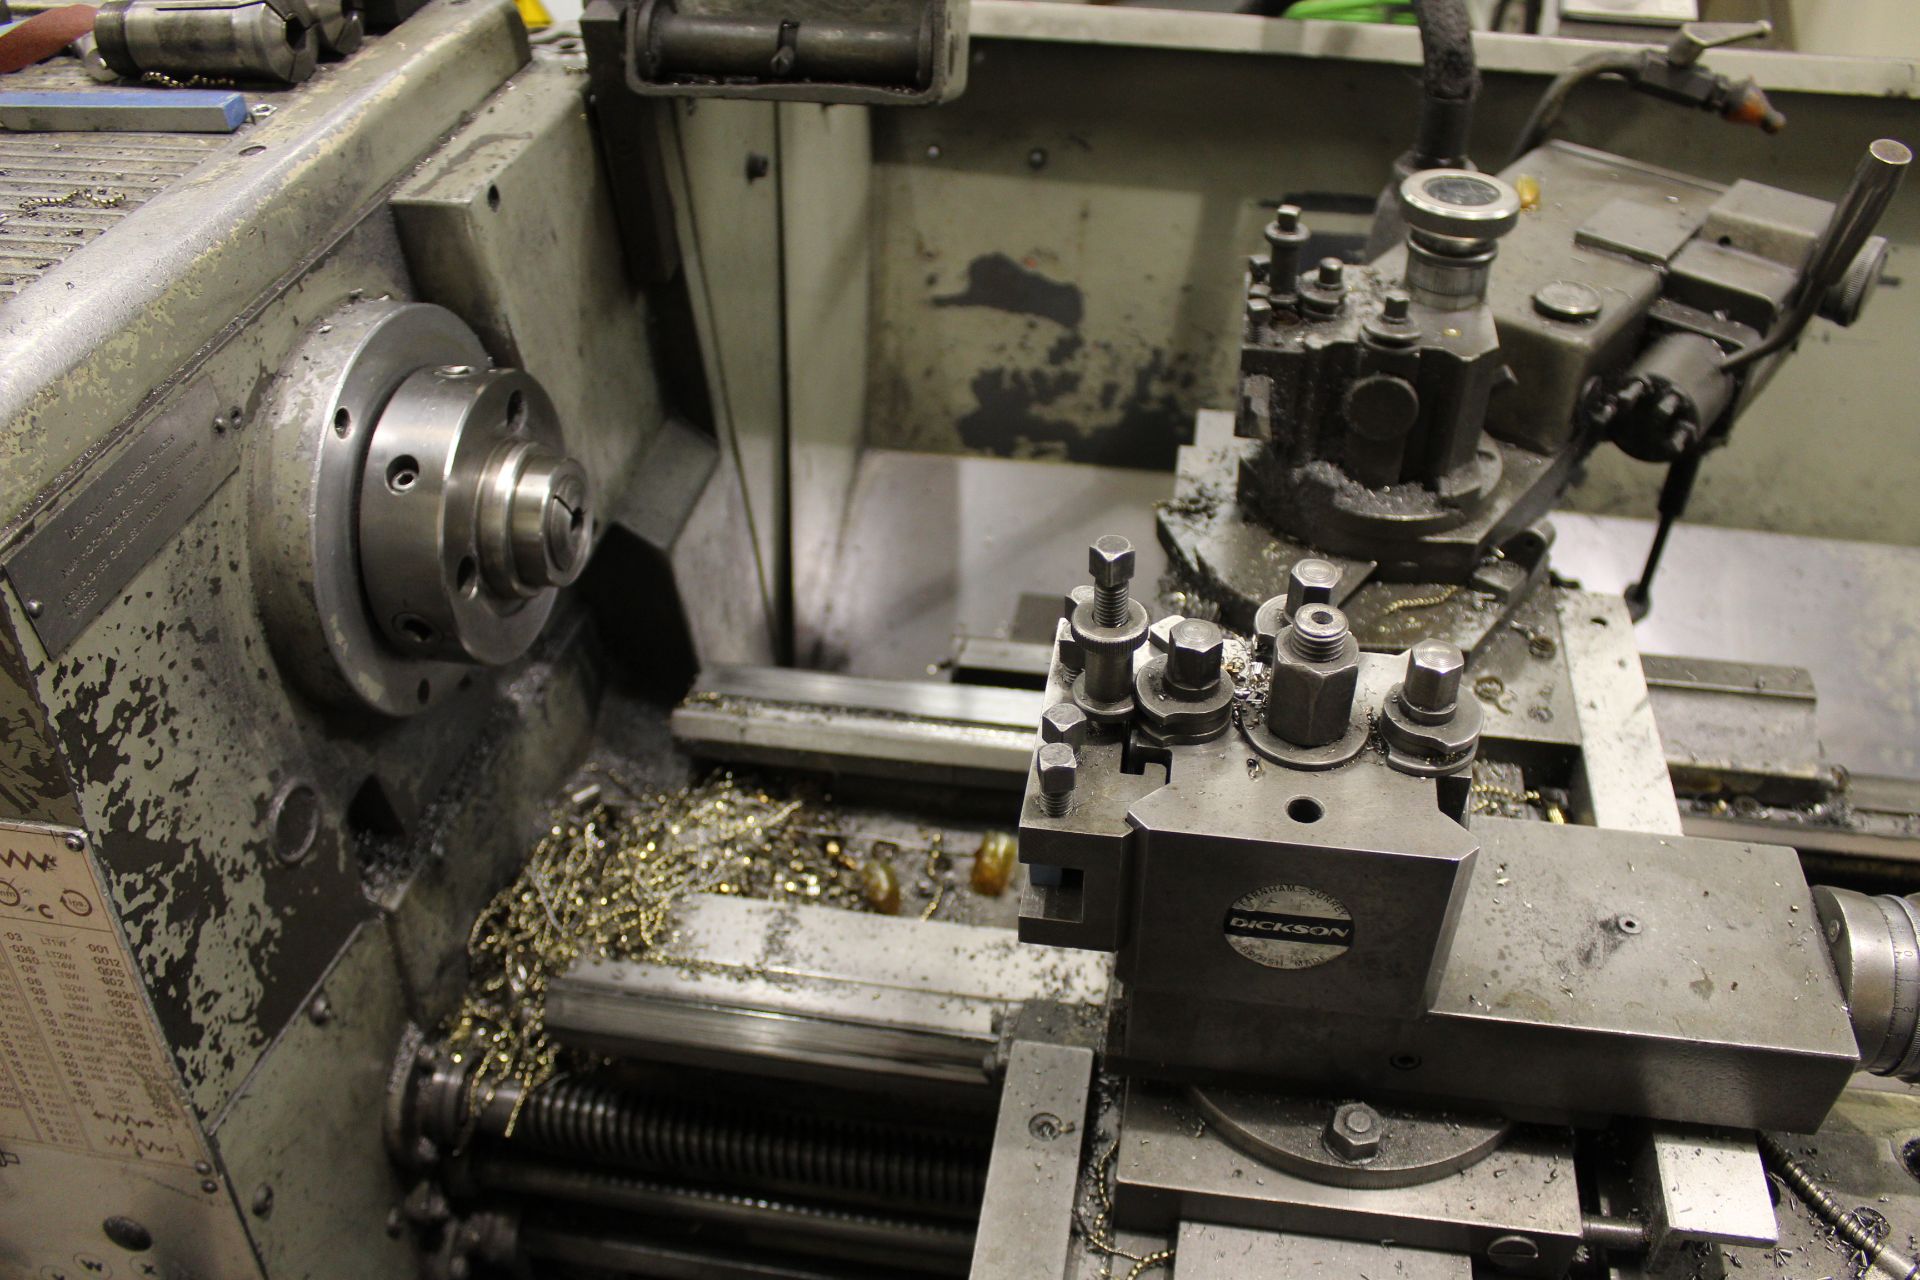 Colchester Student 1800 gap bed centre lathe Serial No. 4/0002/03671, capacity: 330mm x 635mm, swing - Image 3 of 10